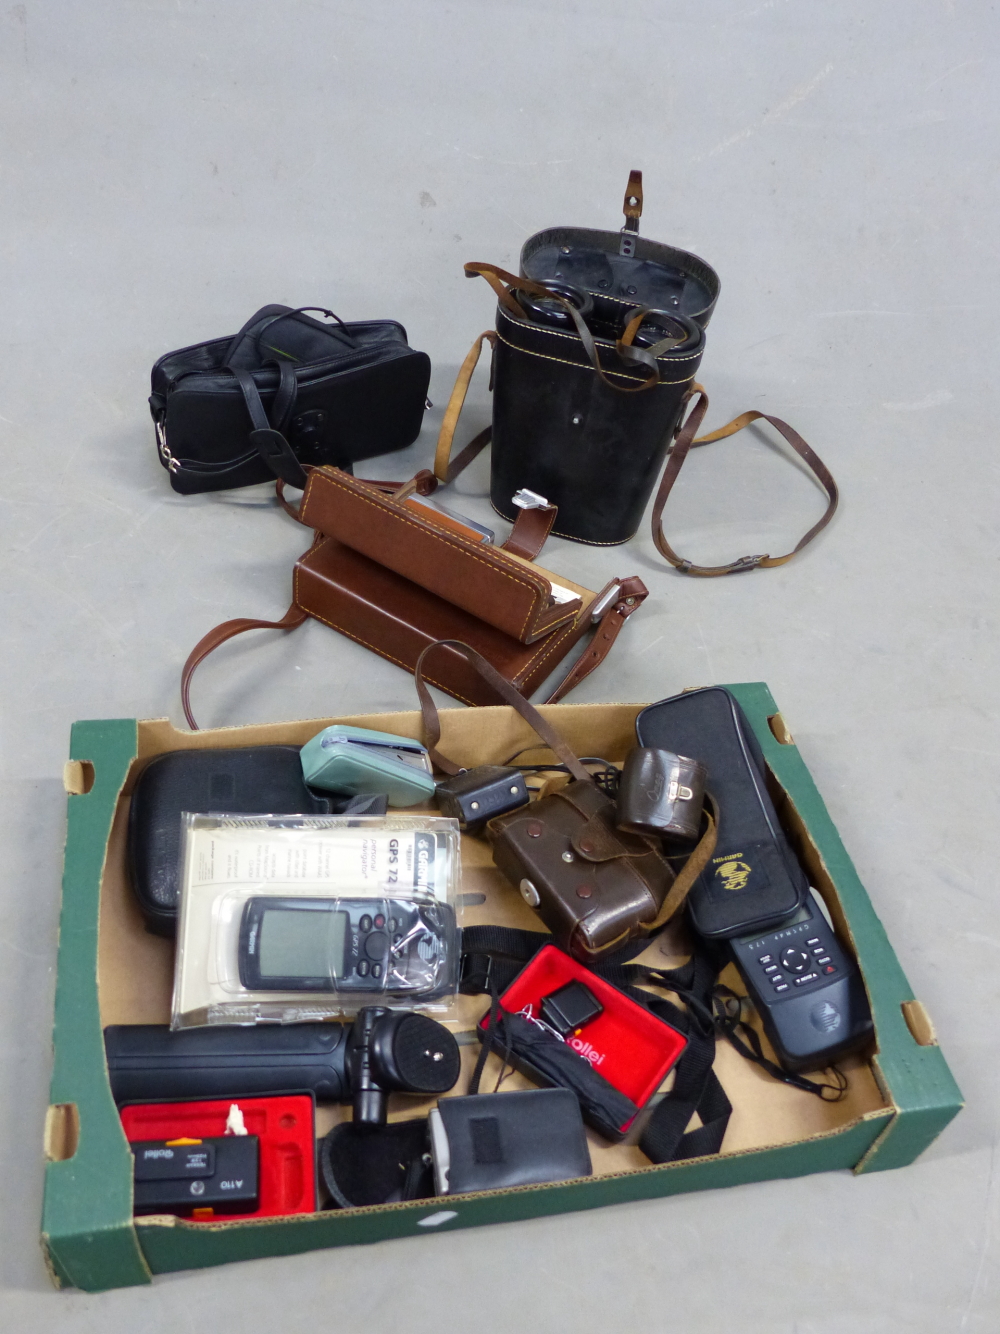 A PAIR OF VINTAGE 7 x 50 BINOCULARS MARKED "BEH" No.453533 (CASED), TOGETHER WITH A PAIR OF